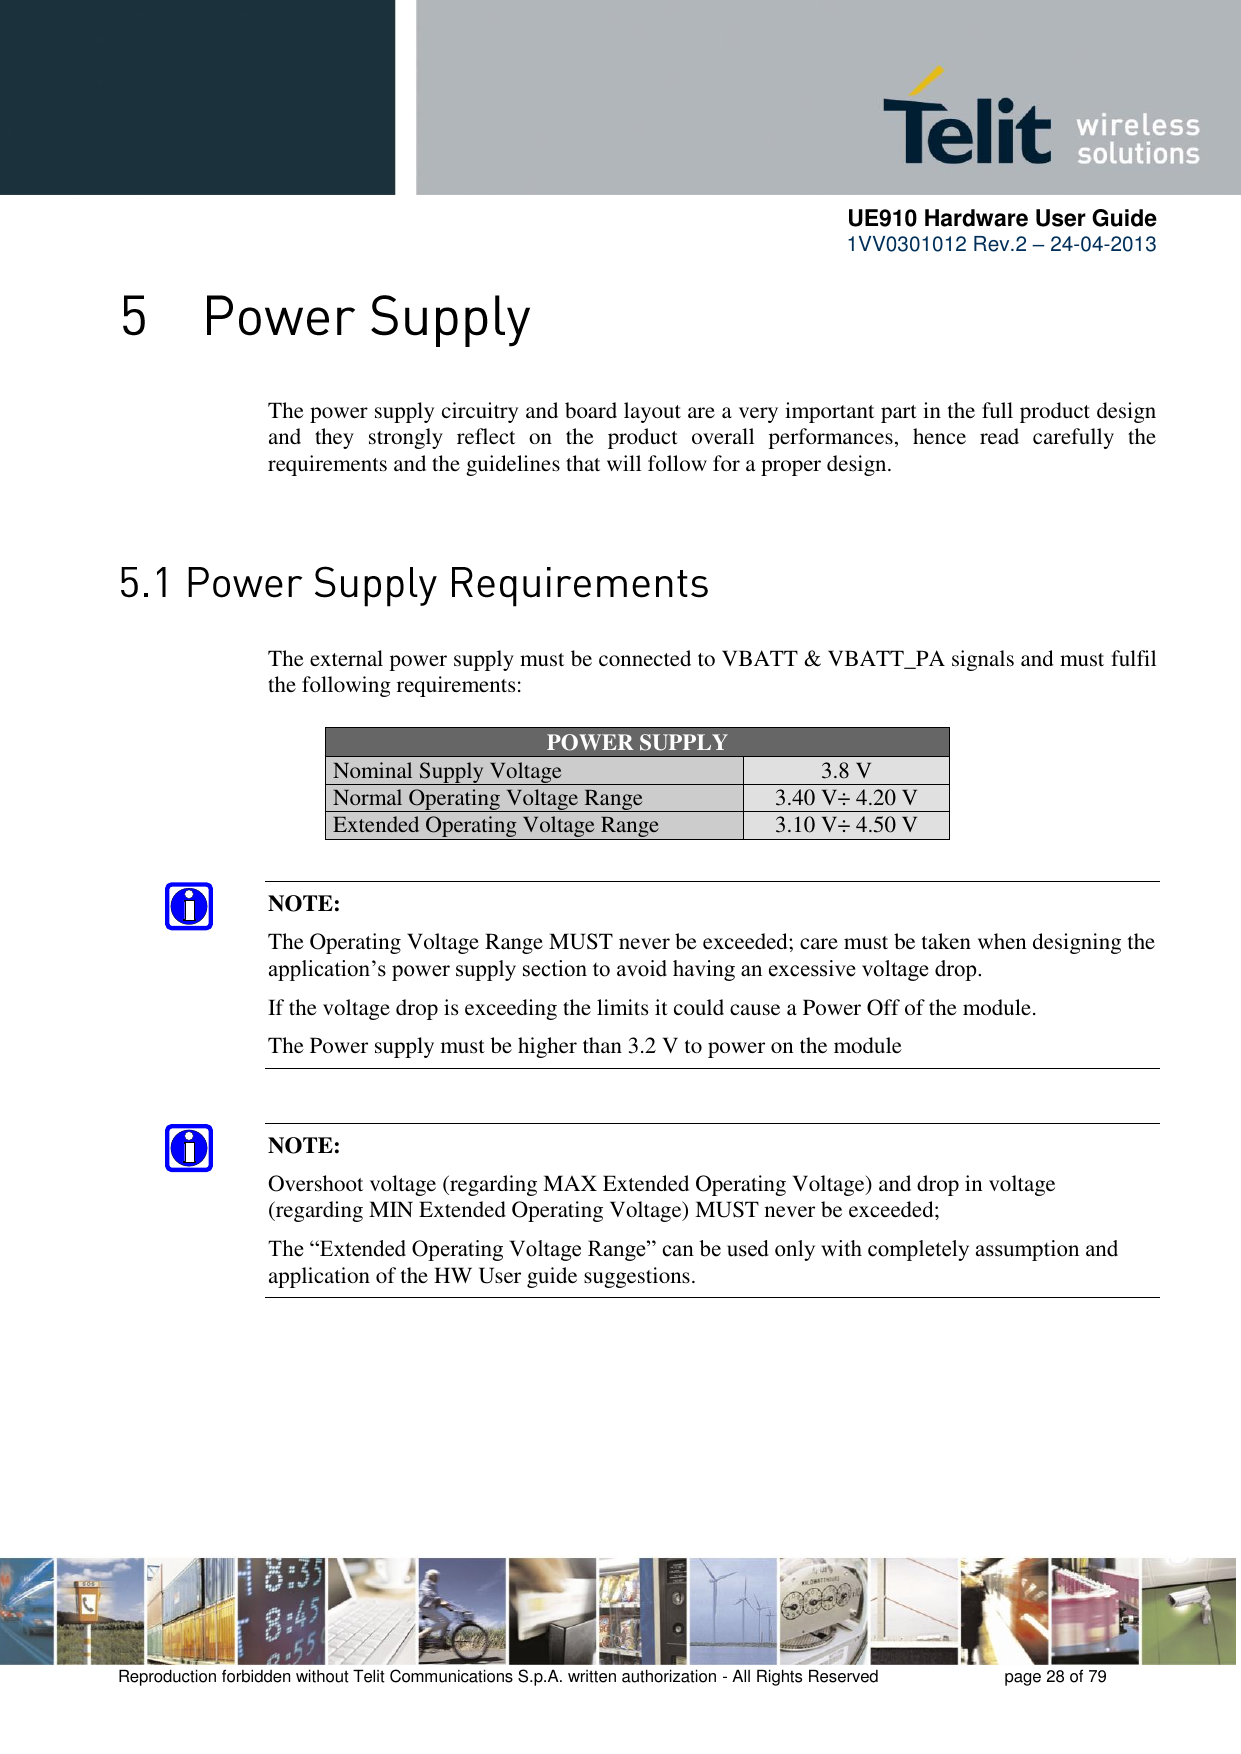      UE910 Hardware User Guide  1VV0301012 Rev.2 – 24-04-2013    Reproduction forbidden without Telit Communications S.p.A. written authorization - All Rights Reserved    page 28 of 79   The power supply circuitry and board layout are a very important part in the full product design and  they  strongly  reflect  on  the  product  overall  performances,  hence  read  carefully  the requirements and the guidelines that will follow for a proper design.    The external power supply must be connected to VBATT &amp; VBATT_PA signals and must fulfil the following requirements: POWER SUPPLY Nominal Supply Voltage 3.8 V Normal Operating Voltage Range 3.40 V÷ 4.20 V Extended Operating Voltage Range 3.10 V÷ 4.50 V NOTE: The Operating Voltage Range MUST never be exceeded; care must be taken when designing the application’s power supply section to avoid having an excessive voltage drop.  If the voltage drop is exceeding the limits it could cause a Power Off of the module. The Power supply must be higher than 3.2 V to power on the module NOTE: Overshoot voltage (regarding MAX Extended Operating Voltage) and drop in voltage (regarding MIN Extended Operating Voltage) MUST never be exceeded;  The “Extended Operating Voltage Range” can be used only with completely assumption and application of the HW User guide suggestions.   